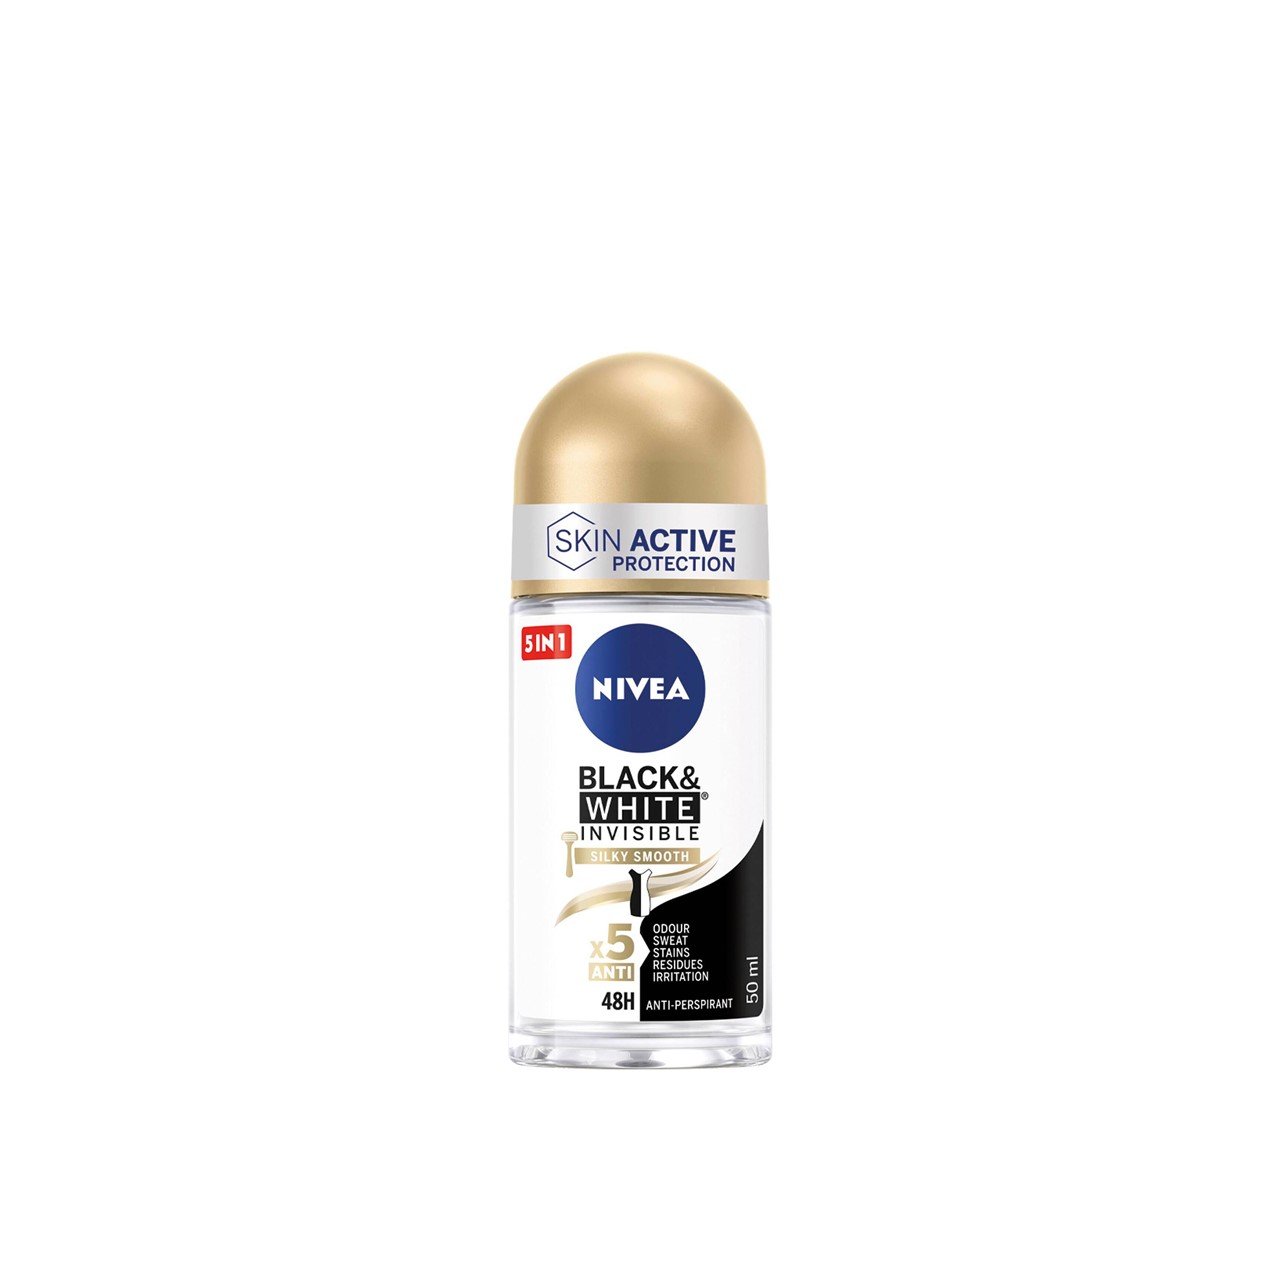 https://static.beautytocare.com/media/catalog/product/n/i/nivea-black-white-invisible-silky-smooth-roll-on-50ml.jpg